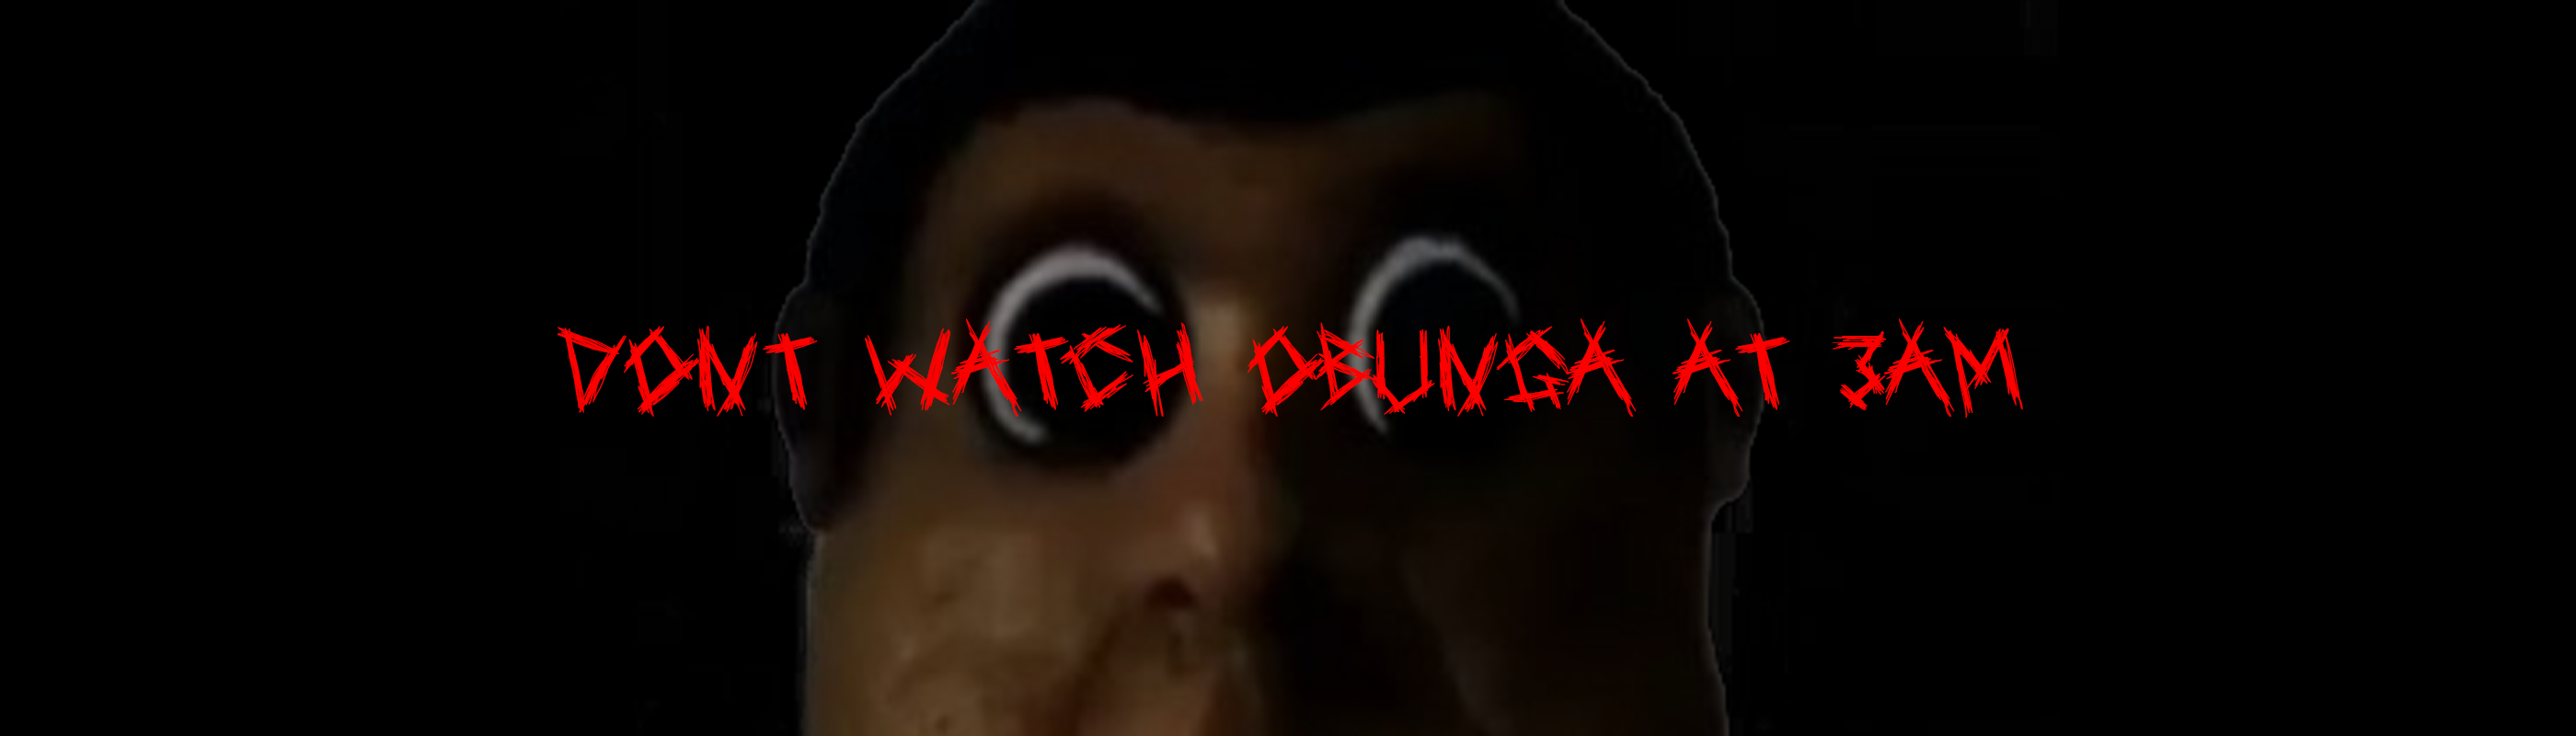 Don't Watch Obunga At 3AM